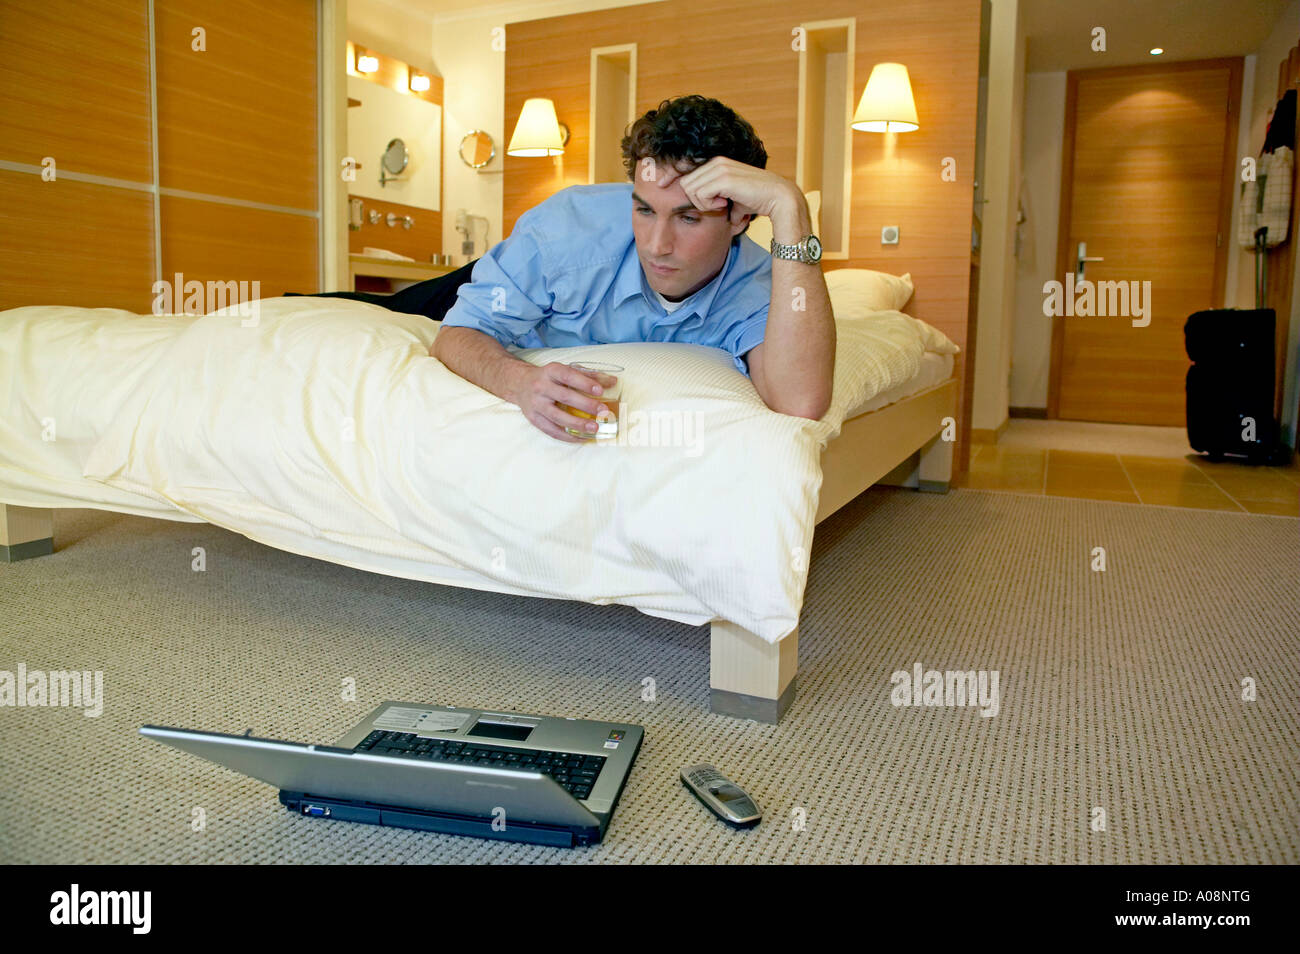 Manager arbeitet mit dem Laptop in seinem Hotelzimmer, Manager working on a laptop in his hotel room Stock Photo